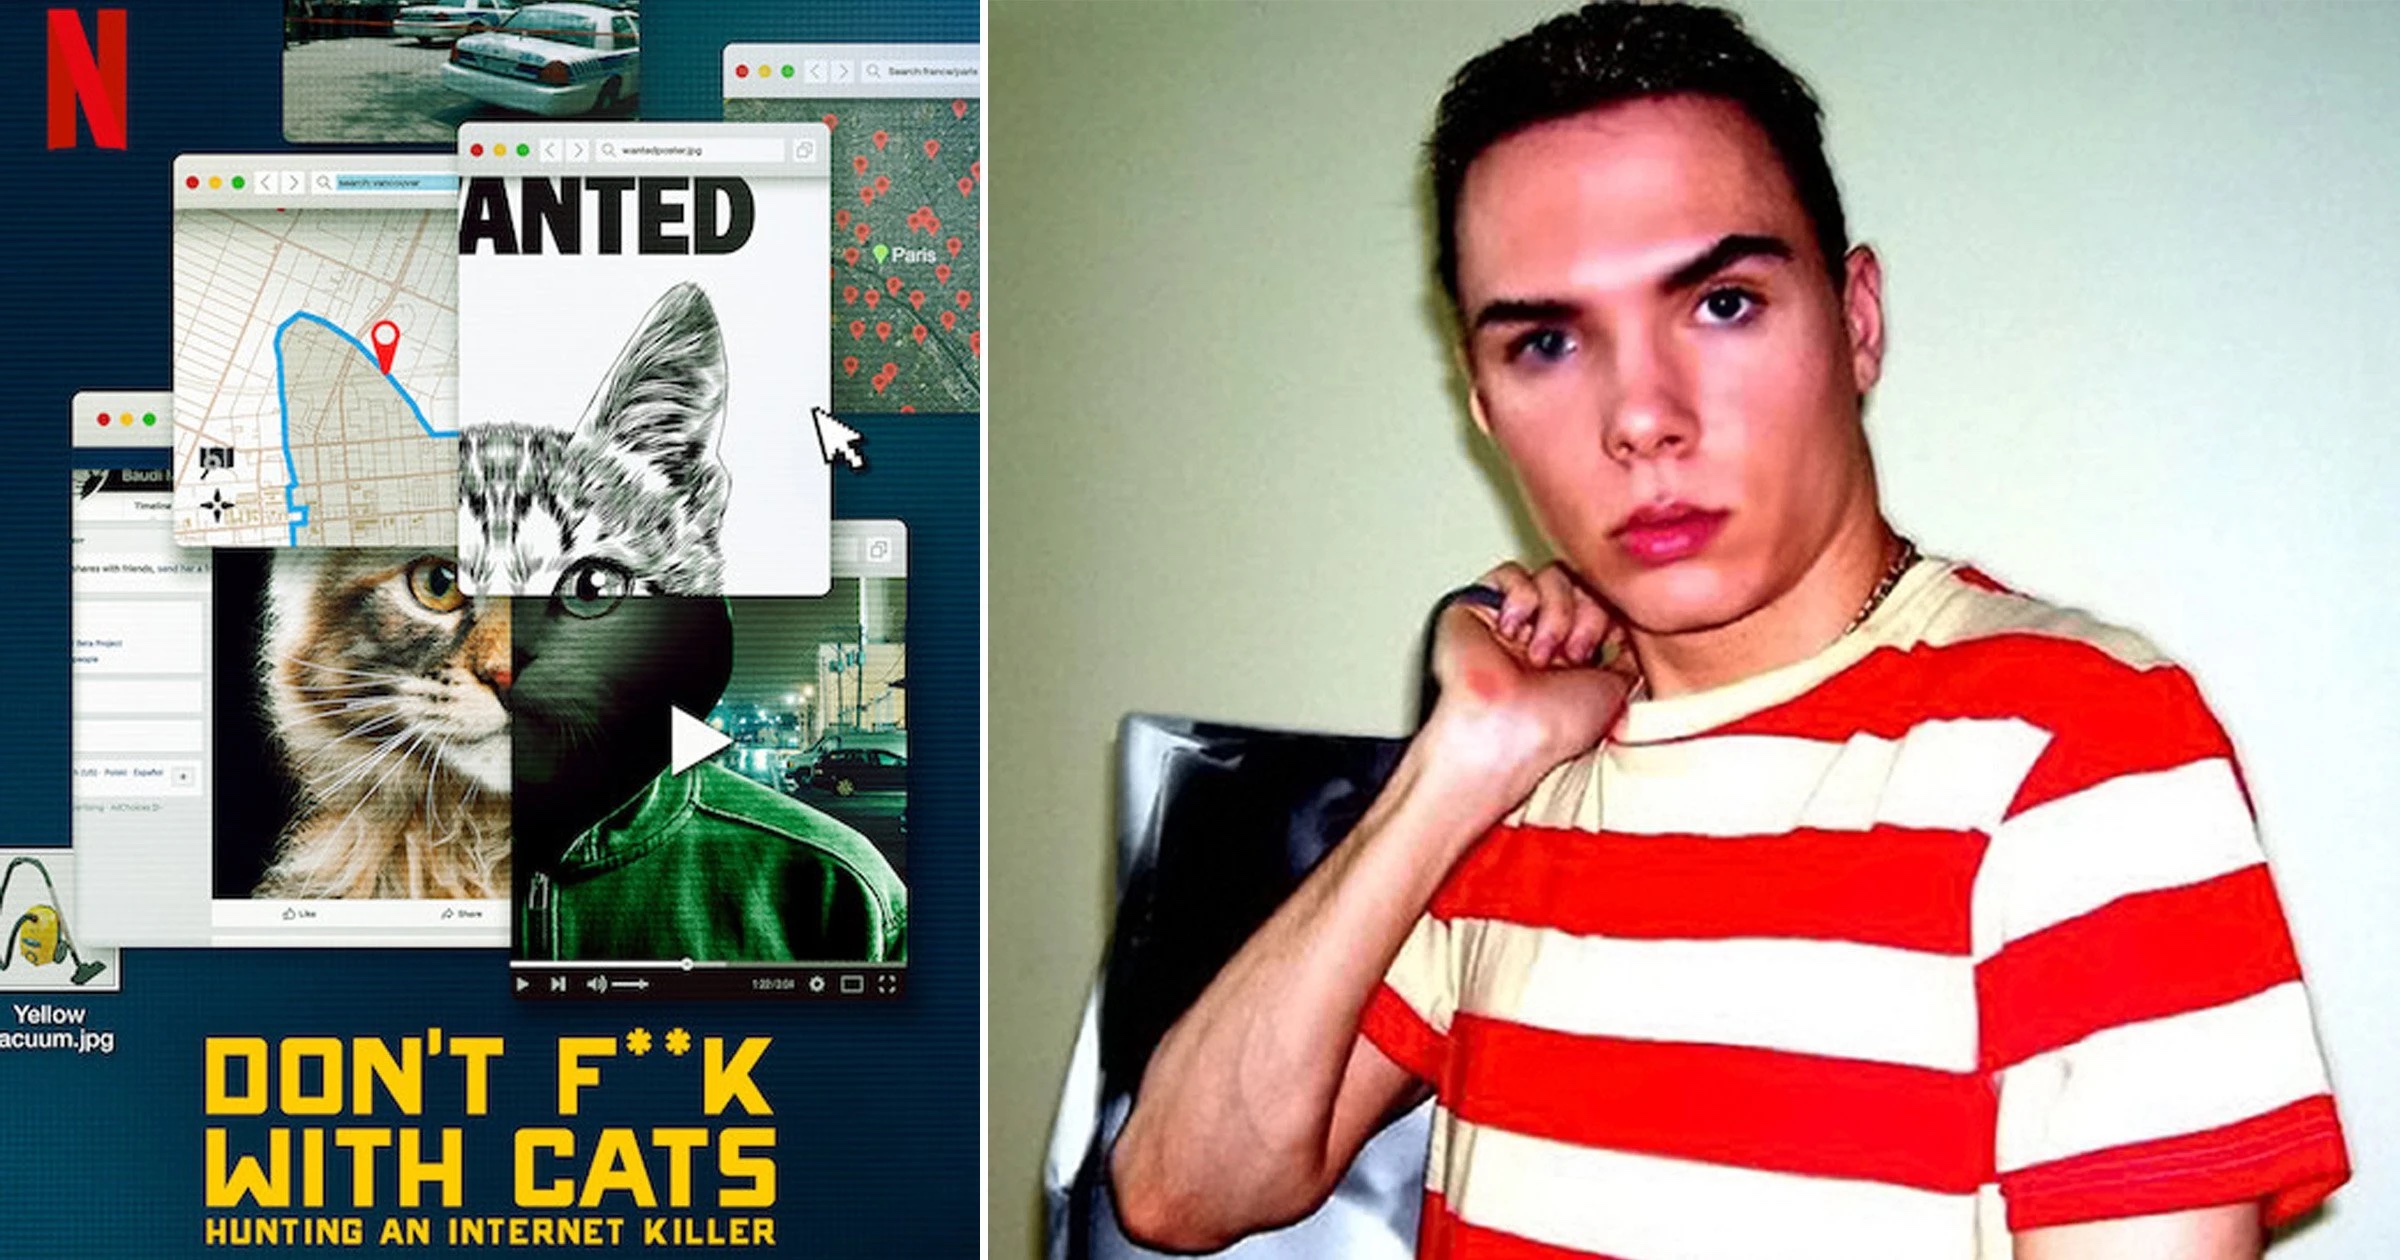 Luka Magnotta, subject of Don't F**k with Cats